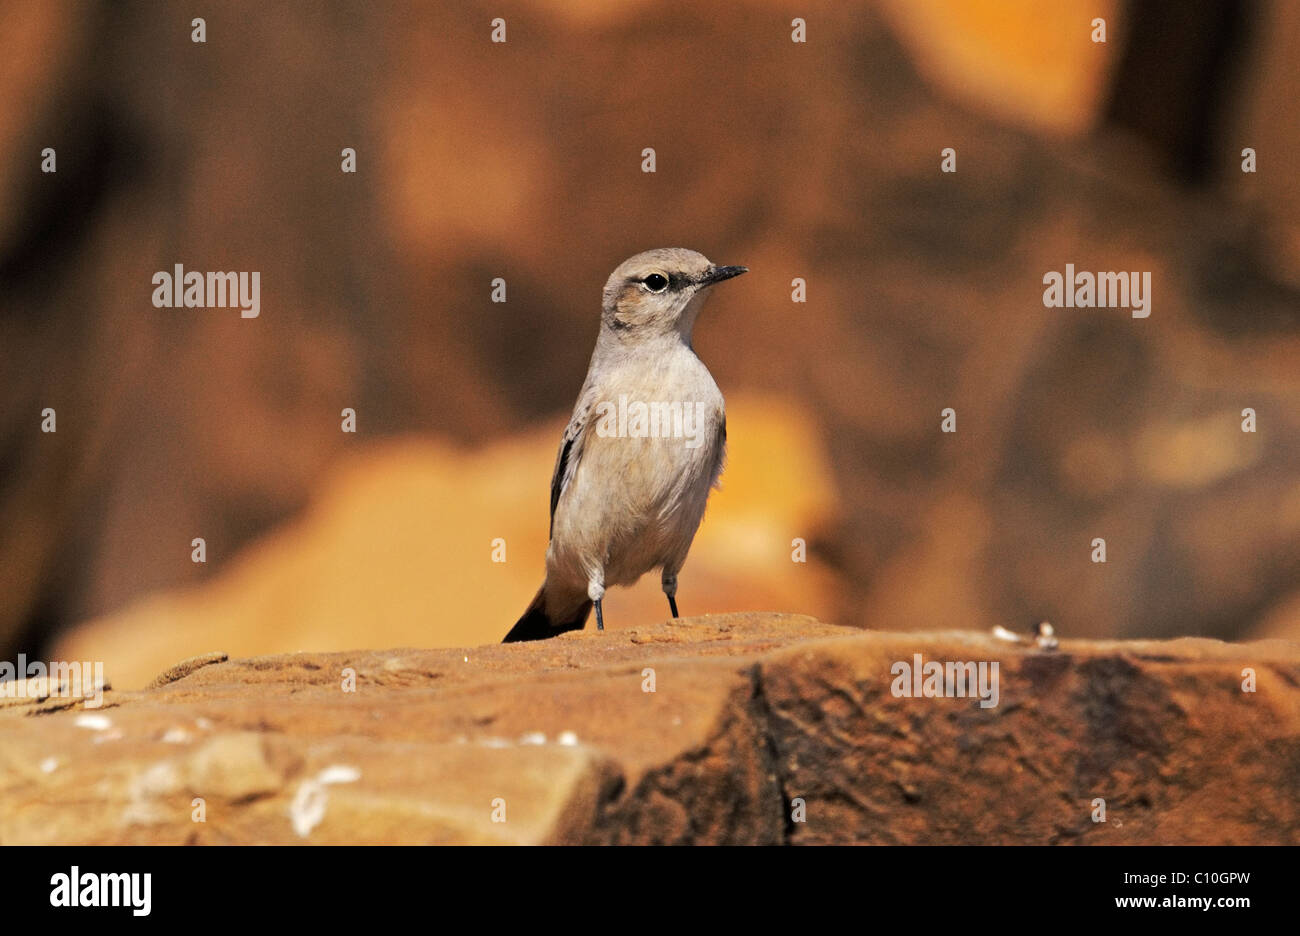 Red-tailed Wheatear (Oenanthe chrysopygia), or the Rusty-tailed Wheatear, Persian Wheatear or Afghan Wheatear perched on a rock Stock Photo